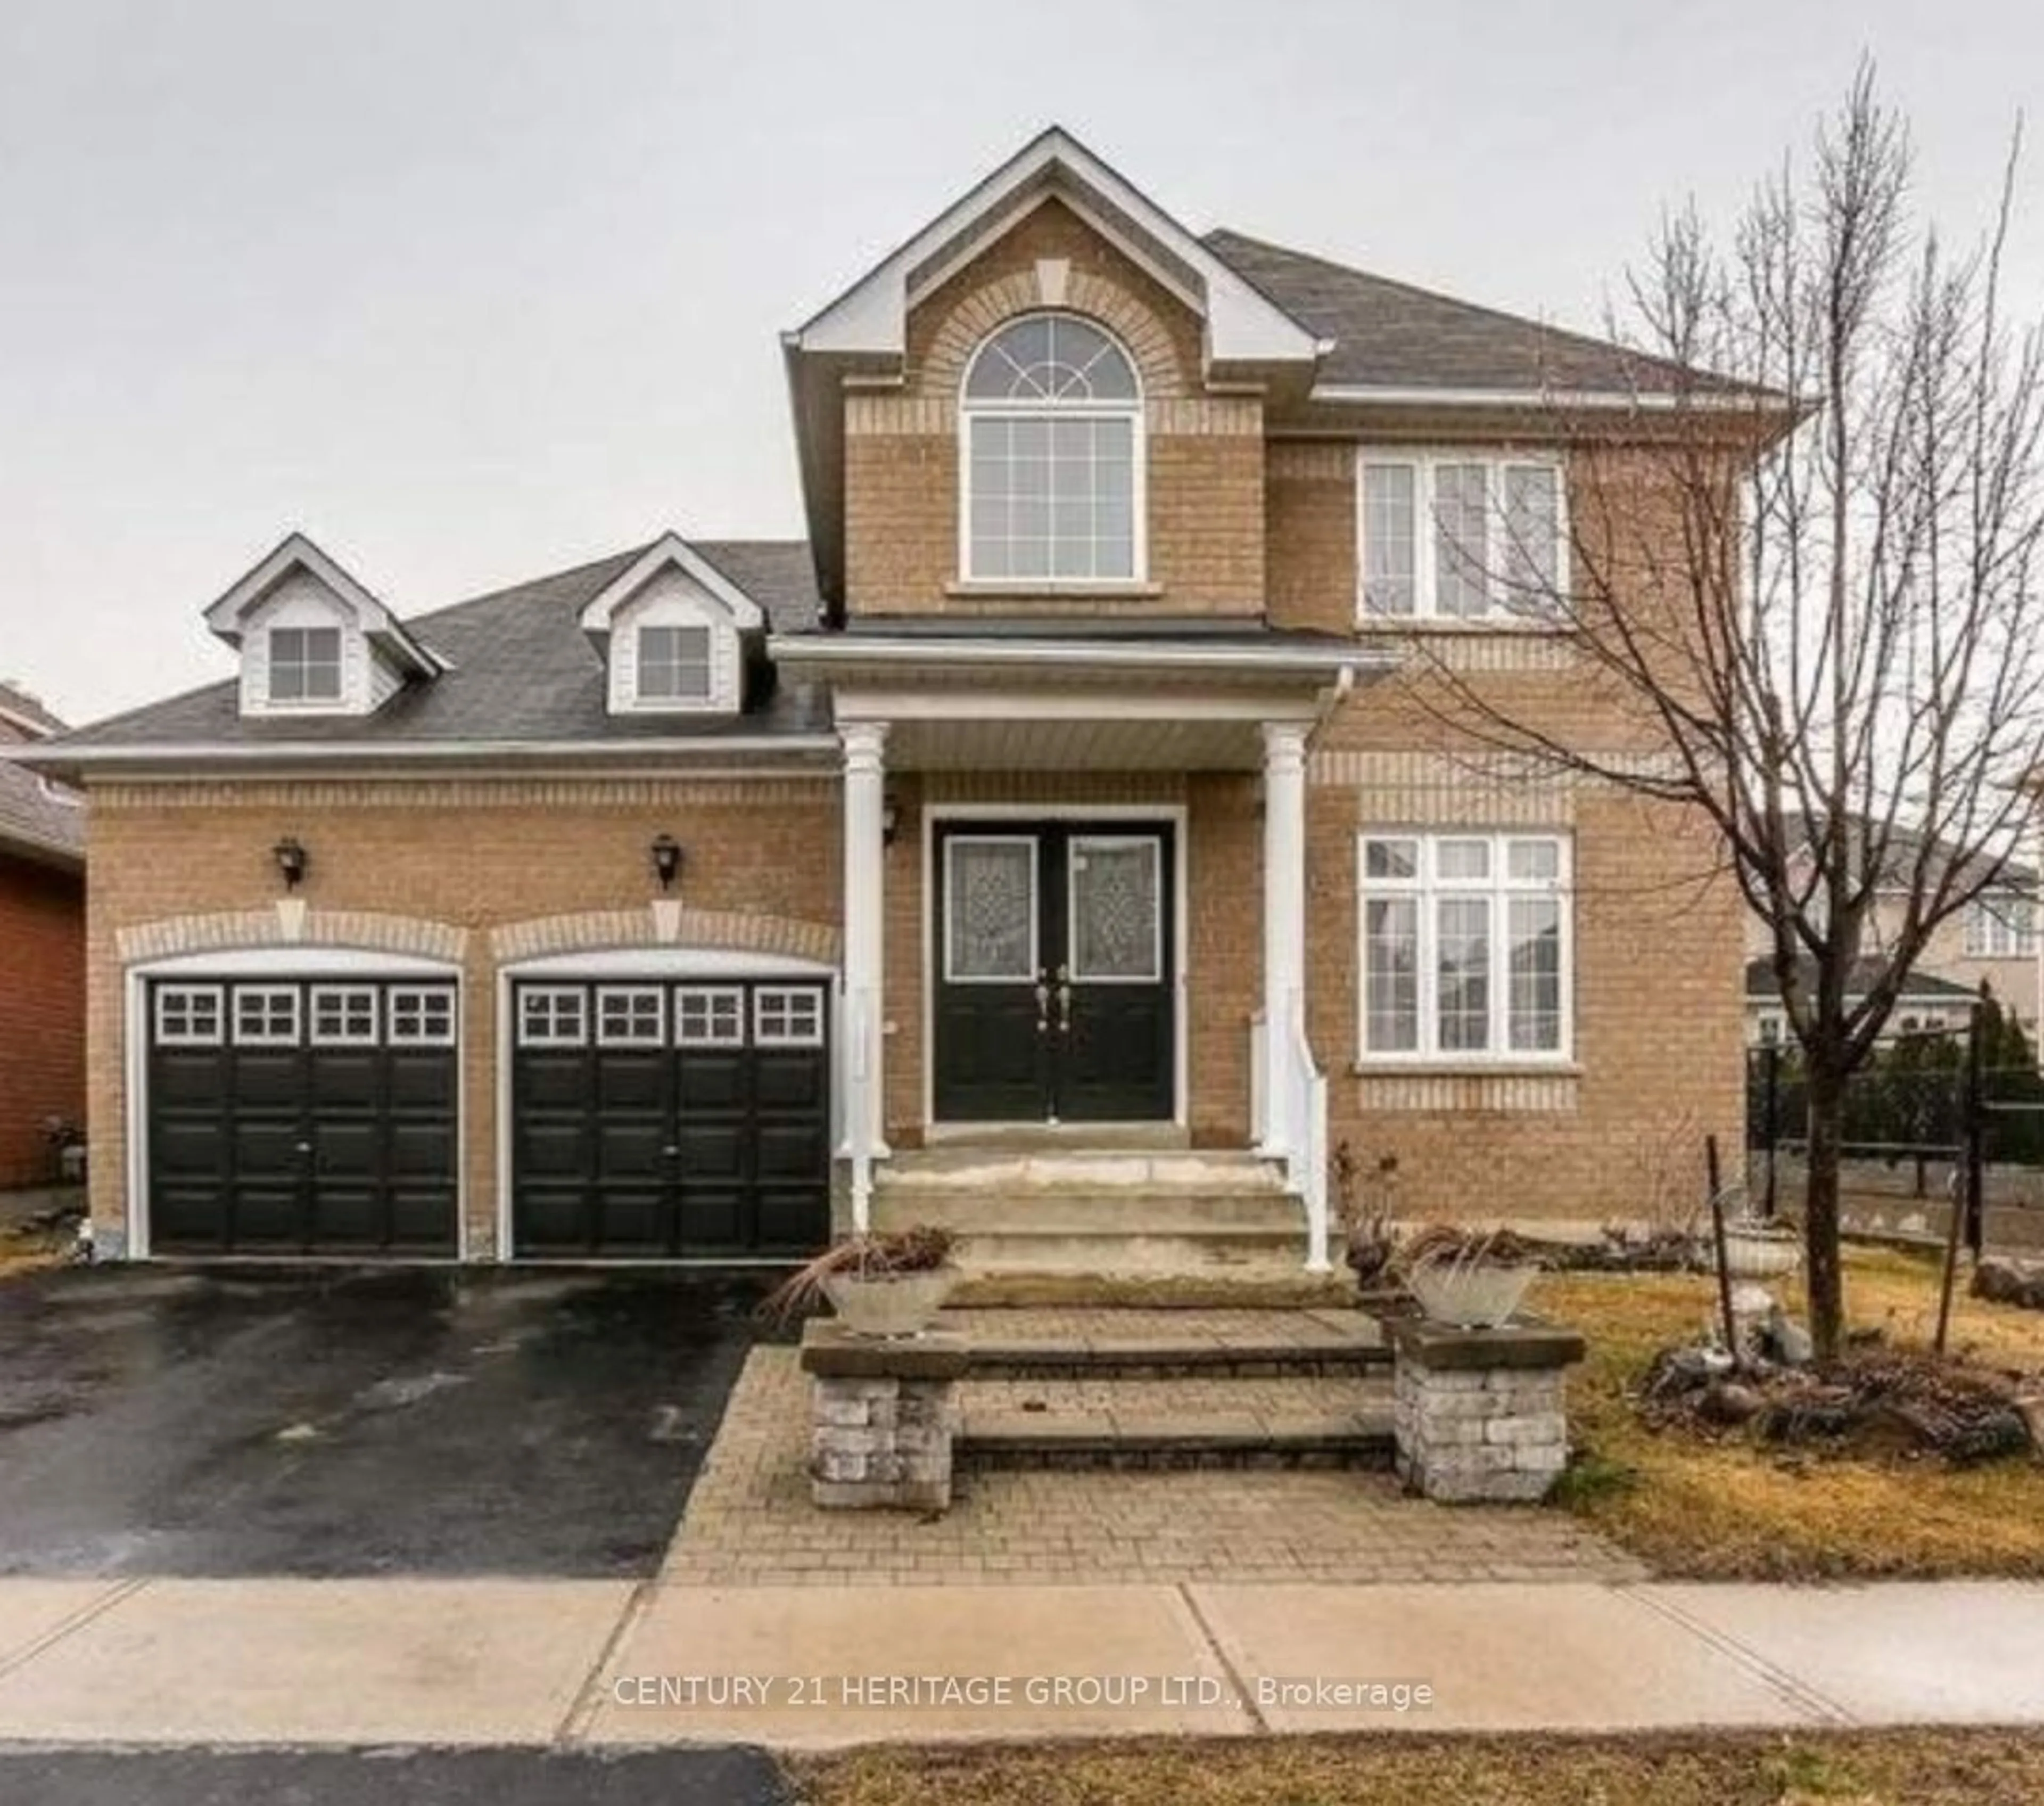 Home with brick exterior material for 207 Flagstone Way, Newmarket Ontario L3X 2Y3